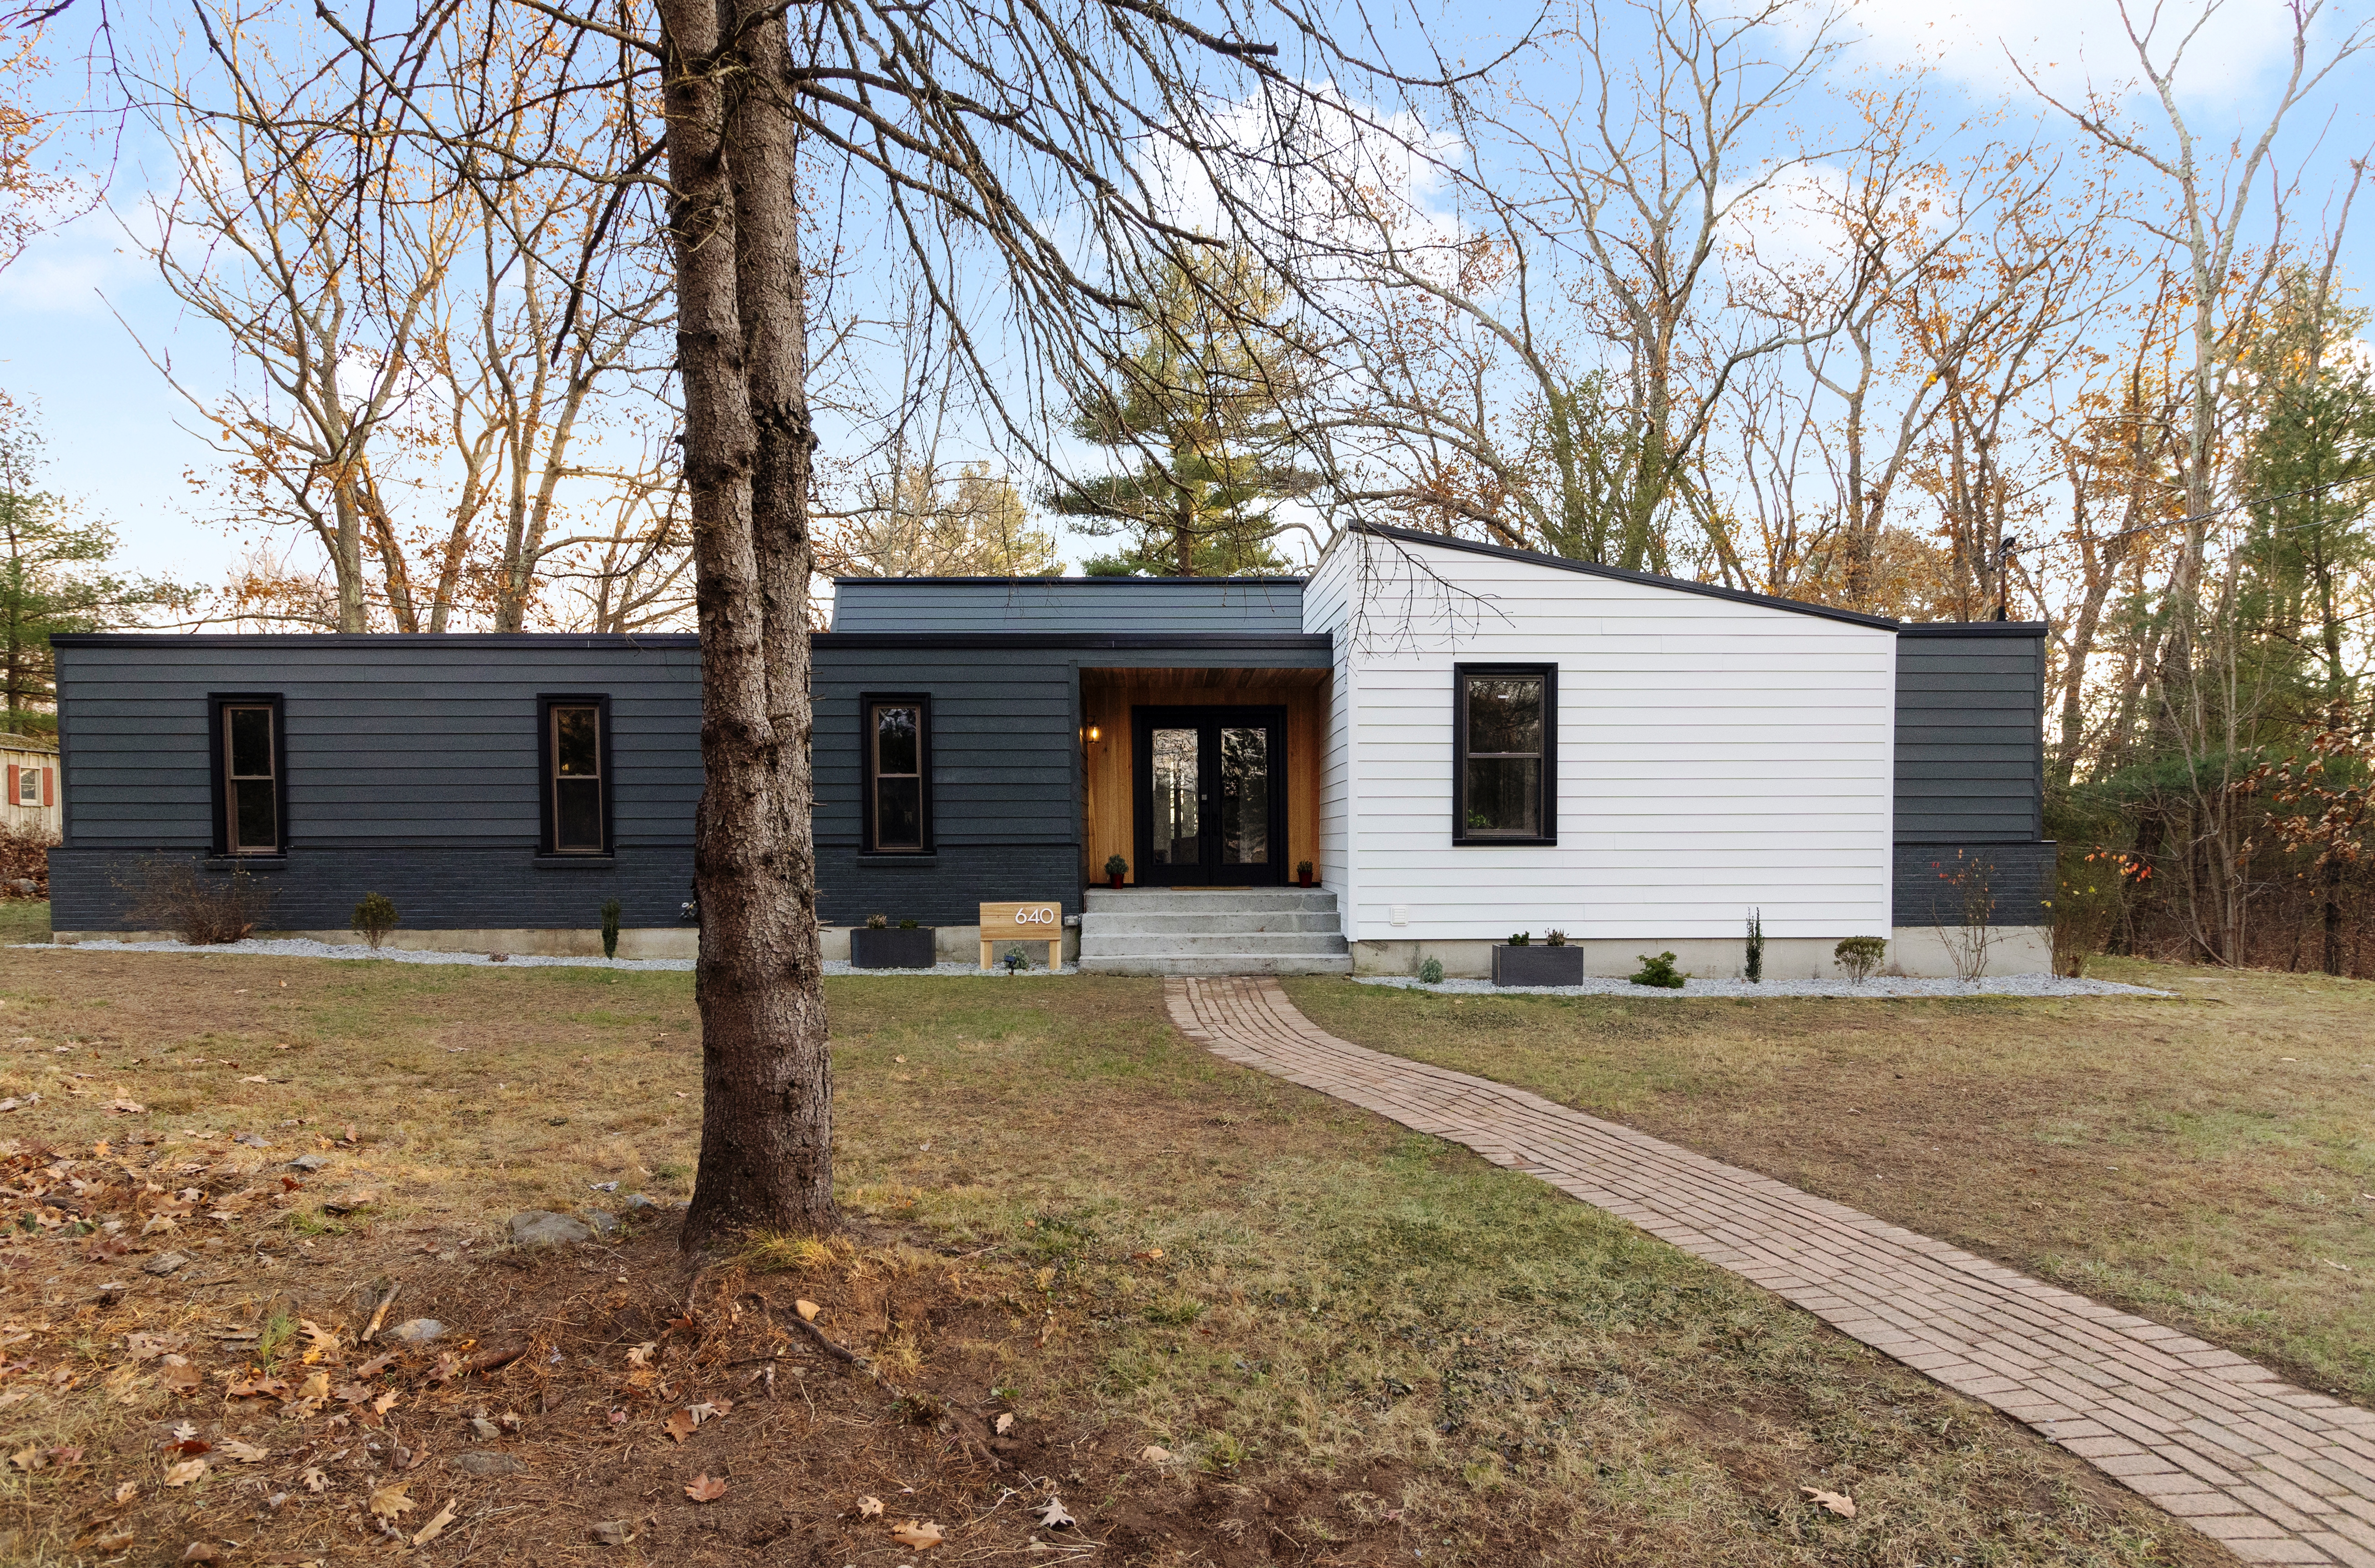 The former ranch-style home was completely renovated, inside and out, starting in 2017.